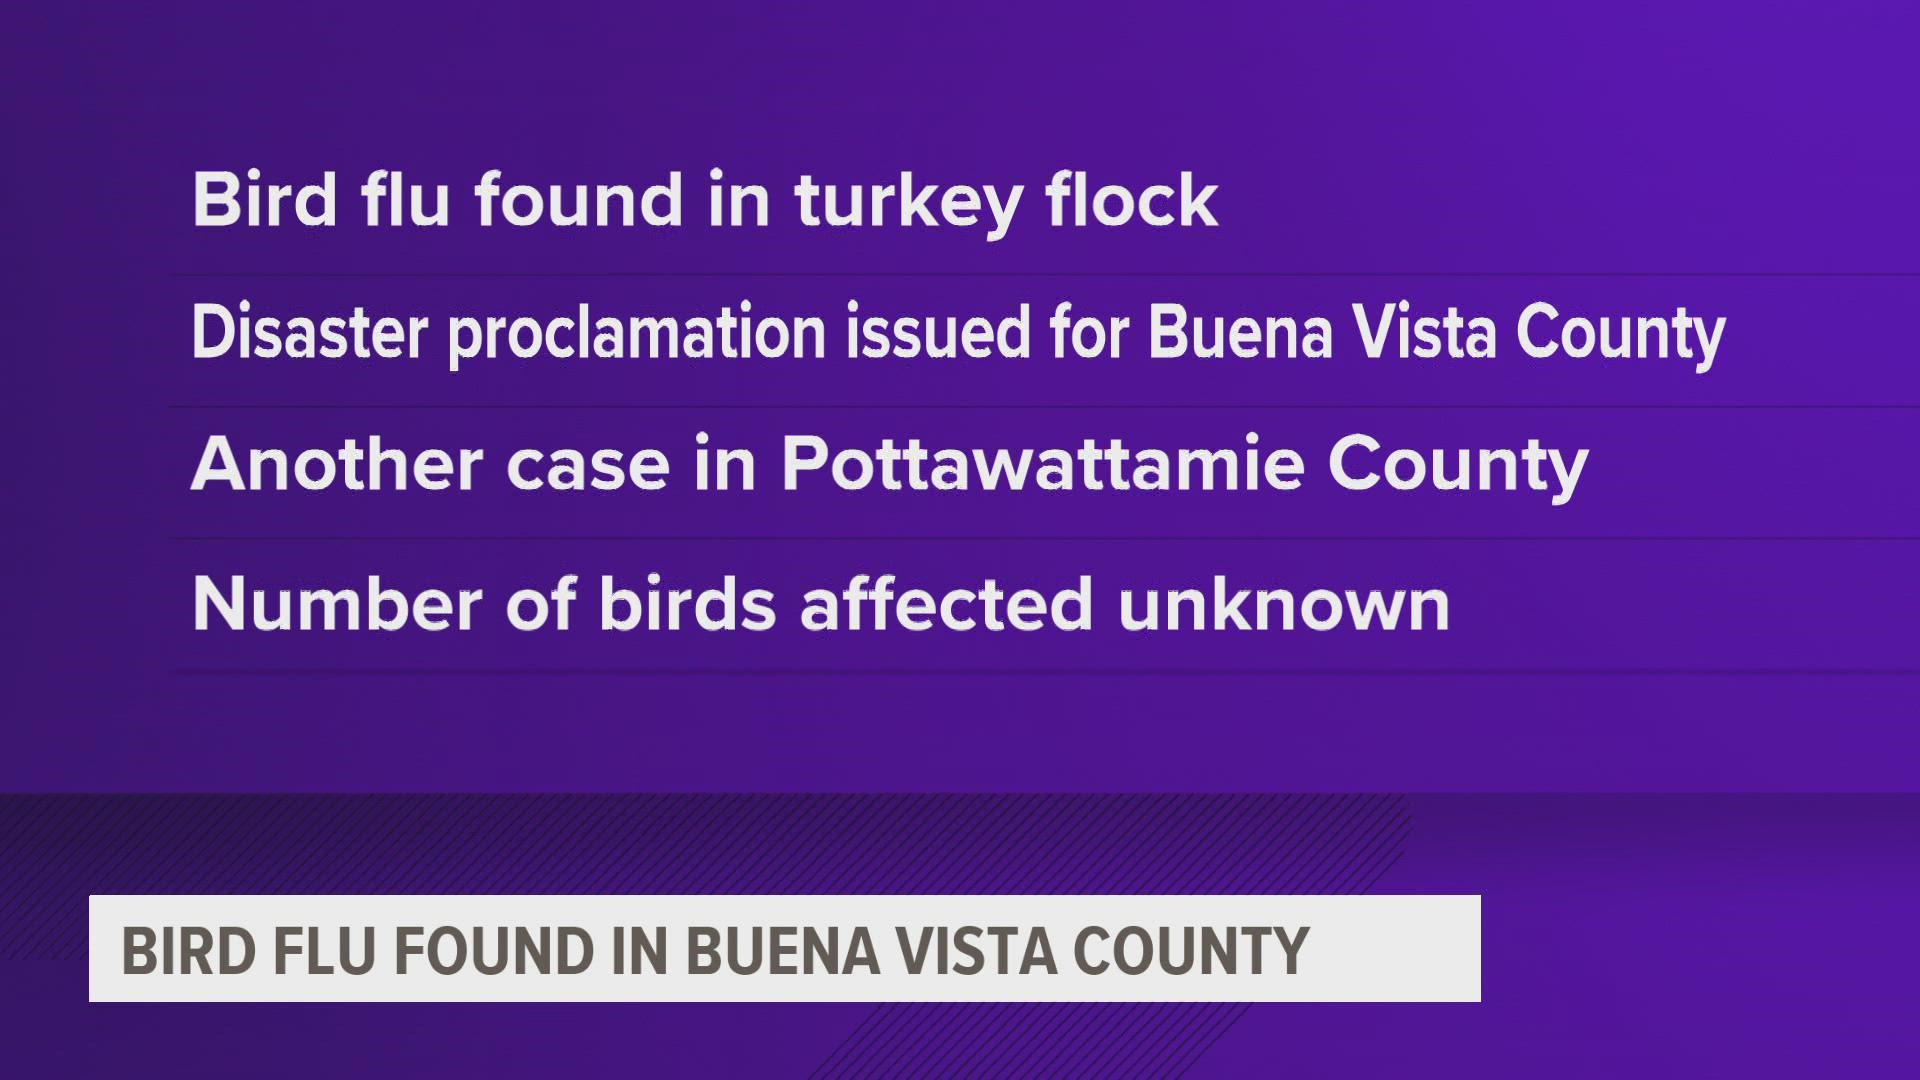 Iowa agriculture officials and the U.S. Department of Agriculture confirmed the case in Buena Vista County, about 100 miles north of a previously-confirmed case.